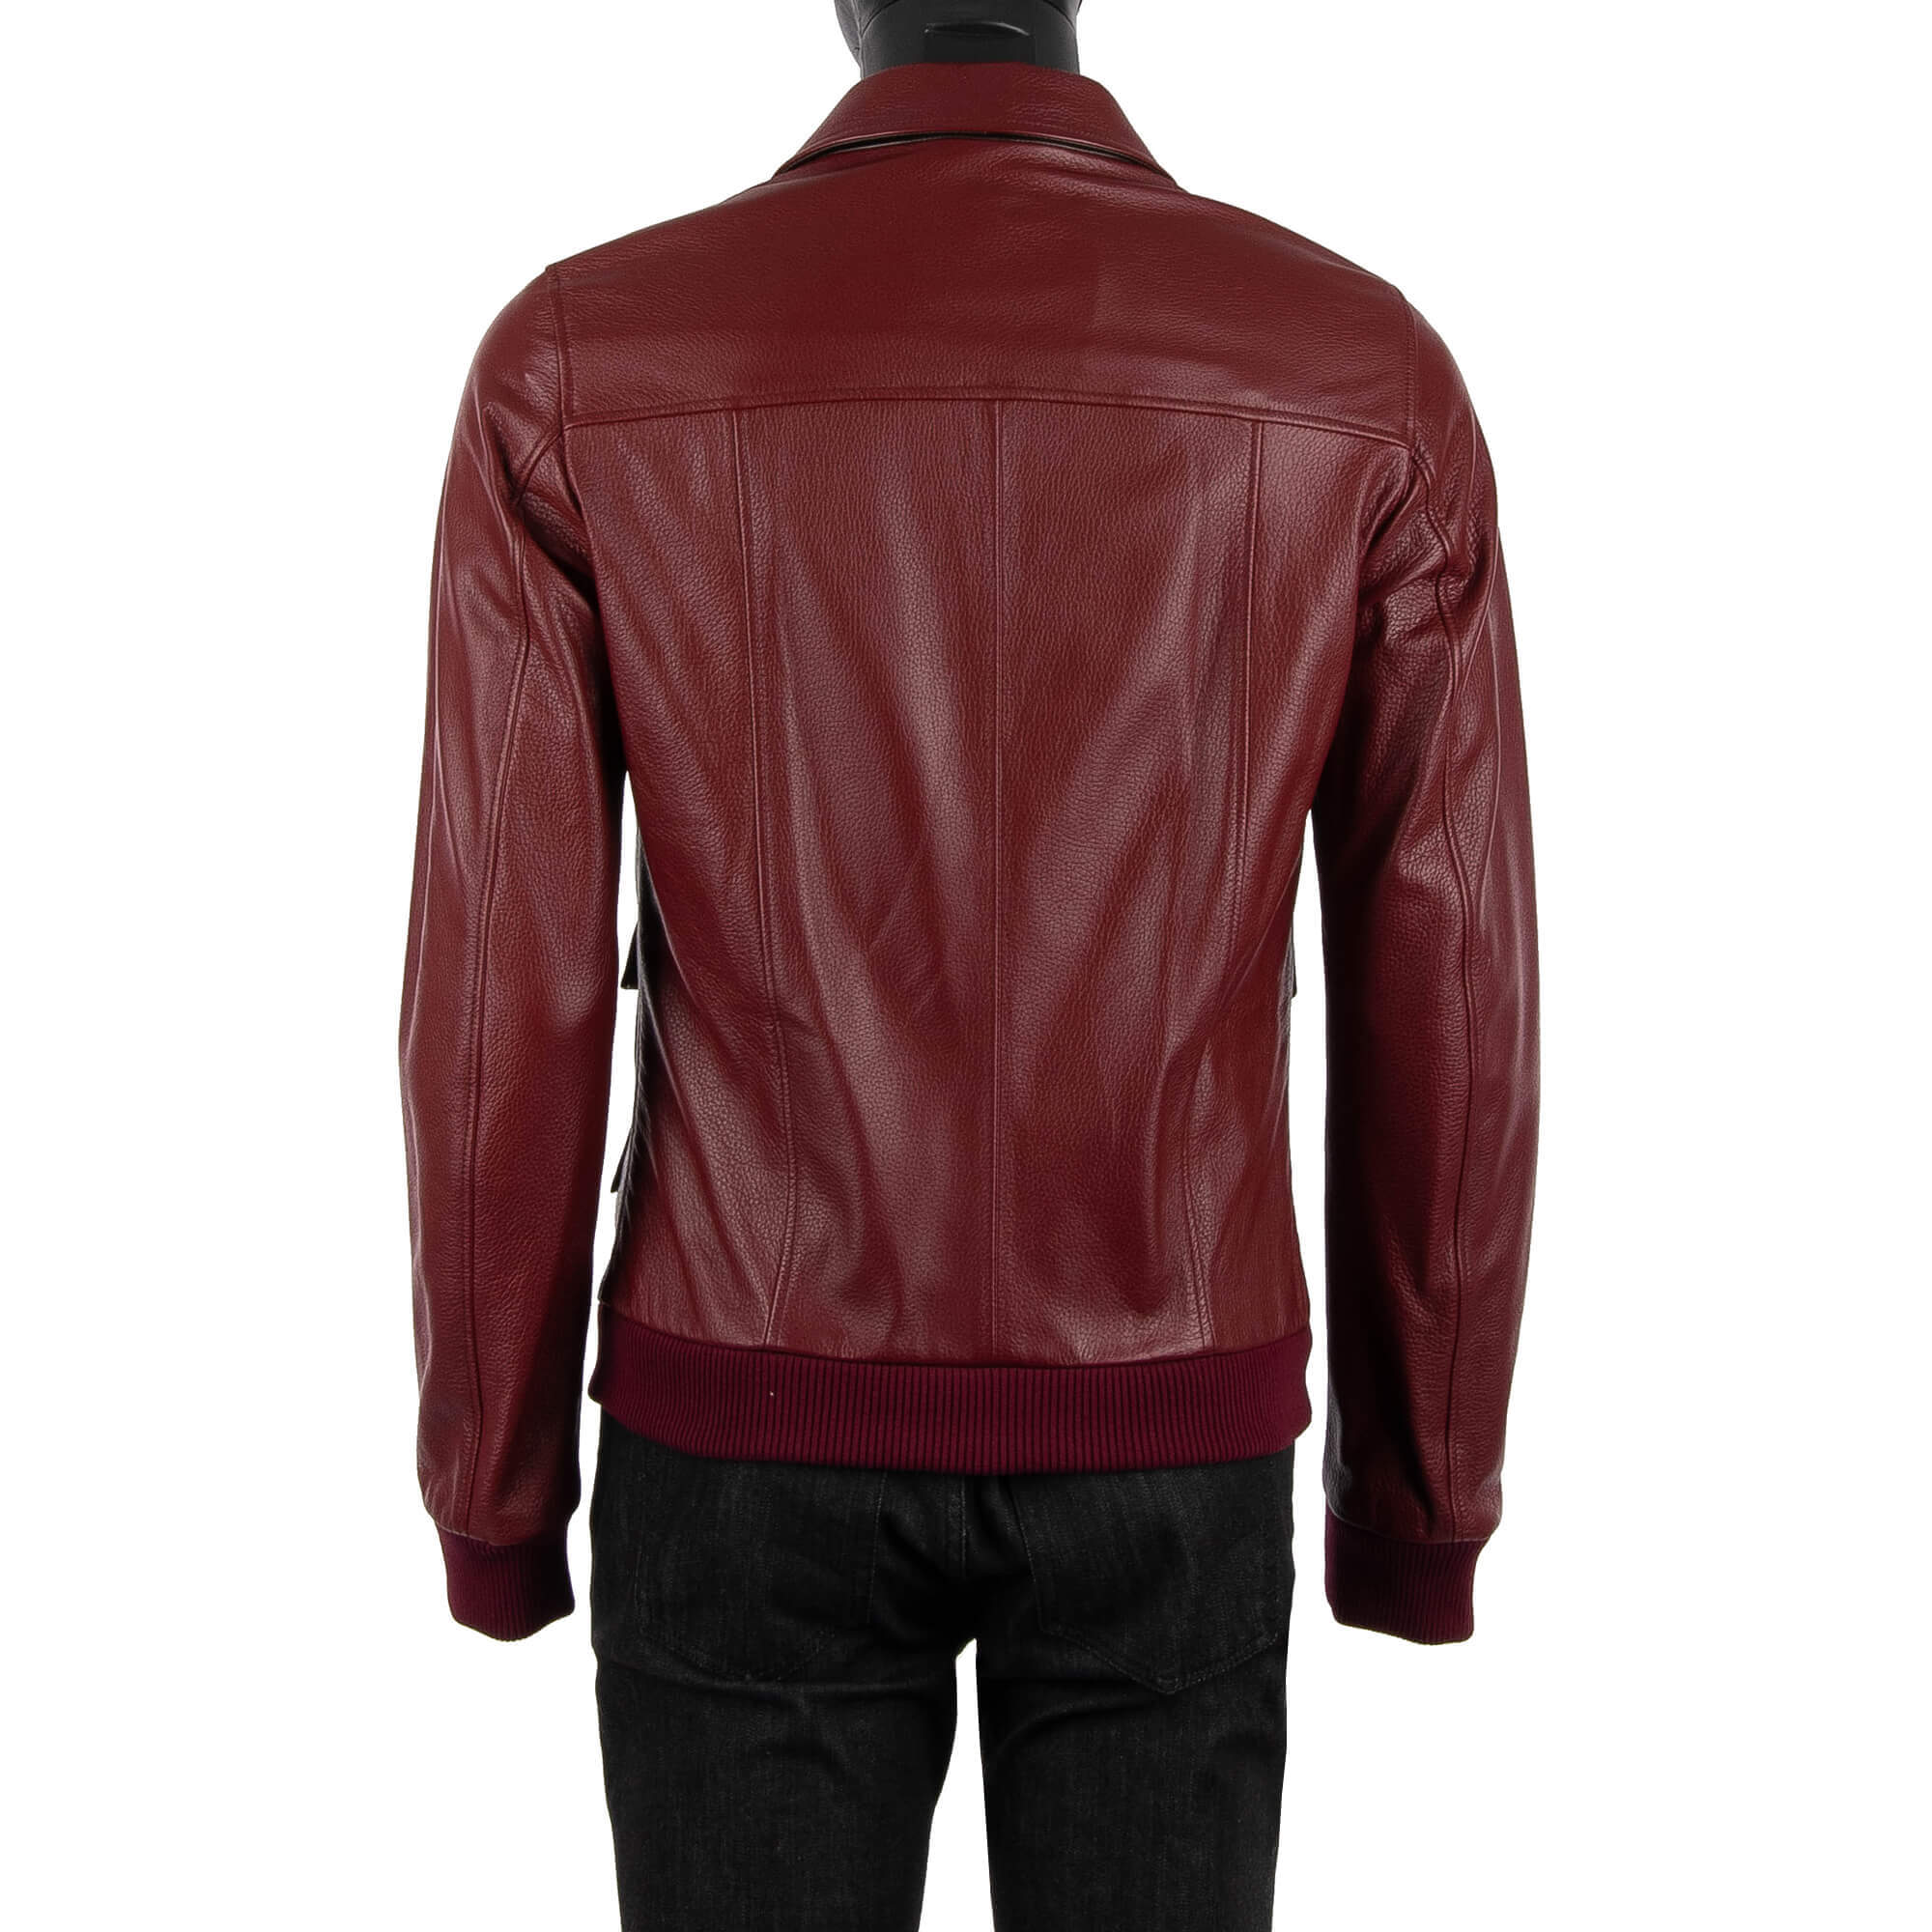 Olive Leather Jacket and Burgundy Leather Bag - Jeans and a Teacup